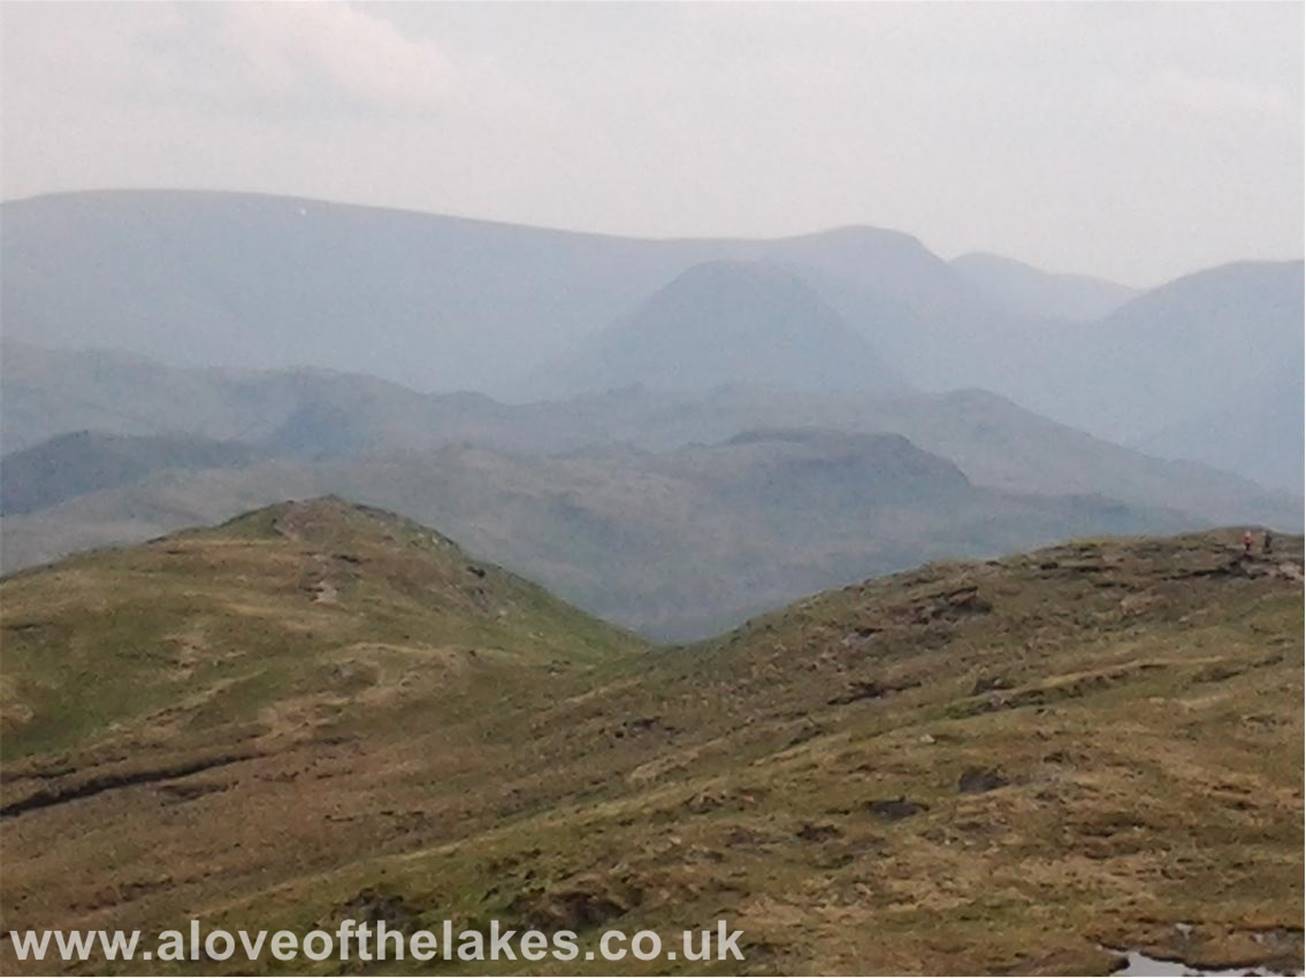 Looking towards Grey Crag and the High Street range